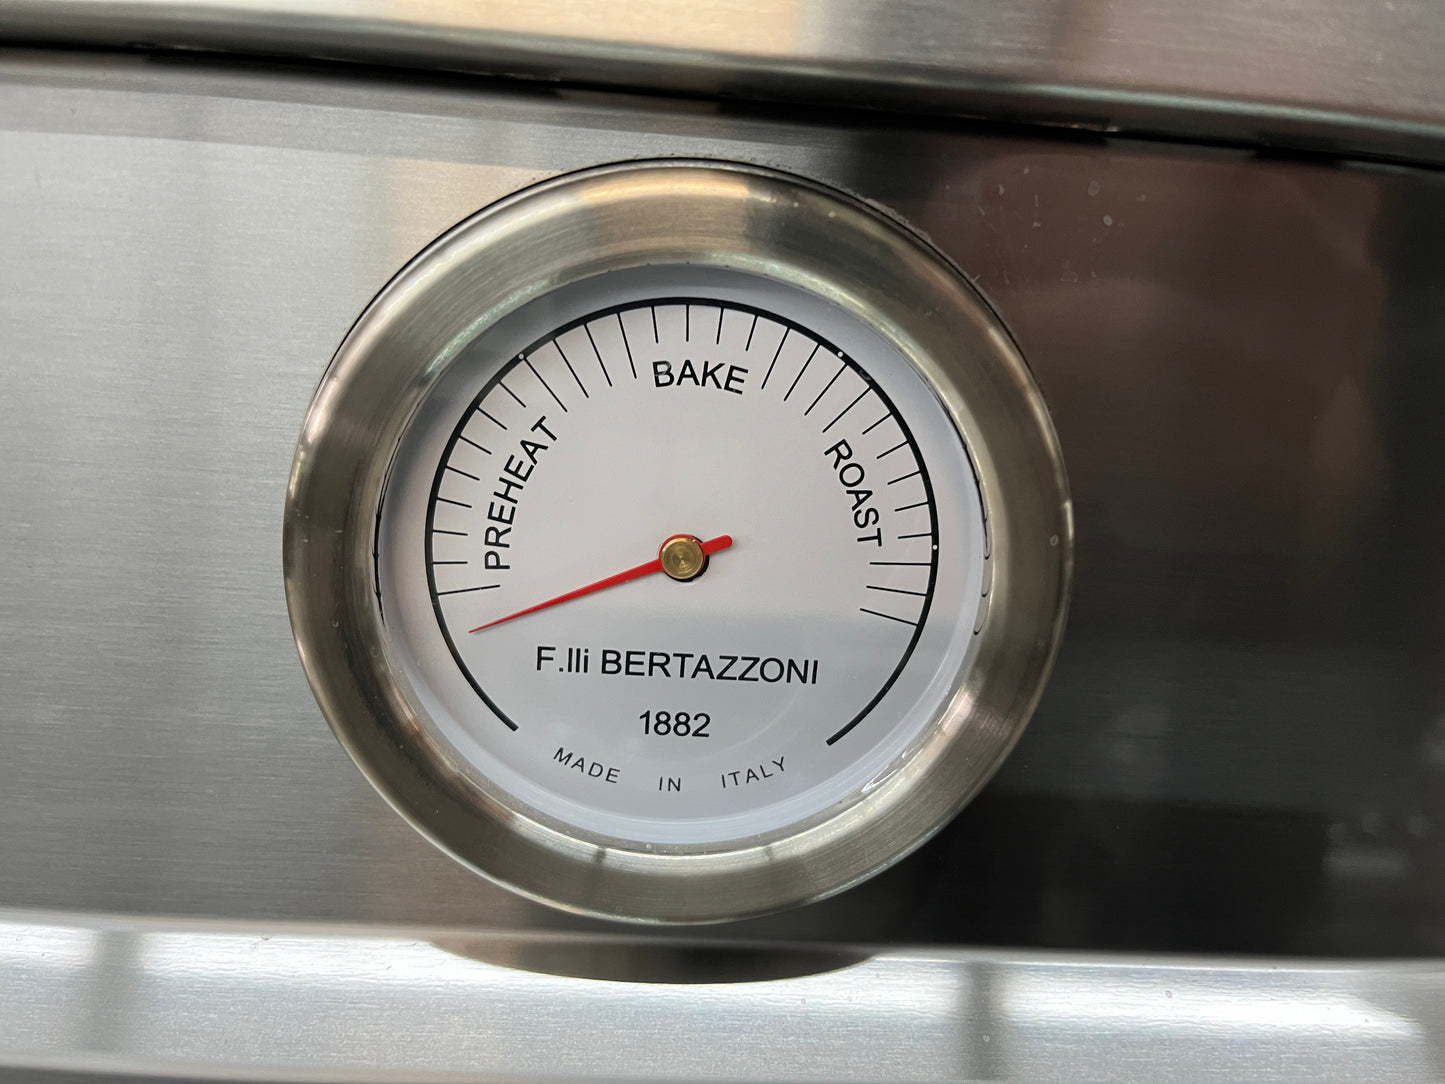 Bertazzoni  MAST365GASXE 36 Inch Gas Range 5 Burners, Continuous Grates, Dual Convection, Temperature Gauge, Infrared Gas Broiler, Soft-Motion Door, CSA, Stainless Steel, Natural Gas, 369346